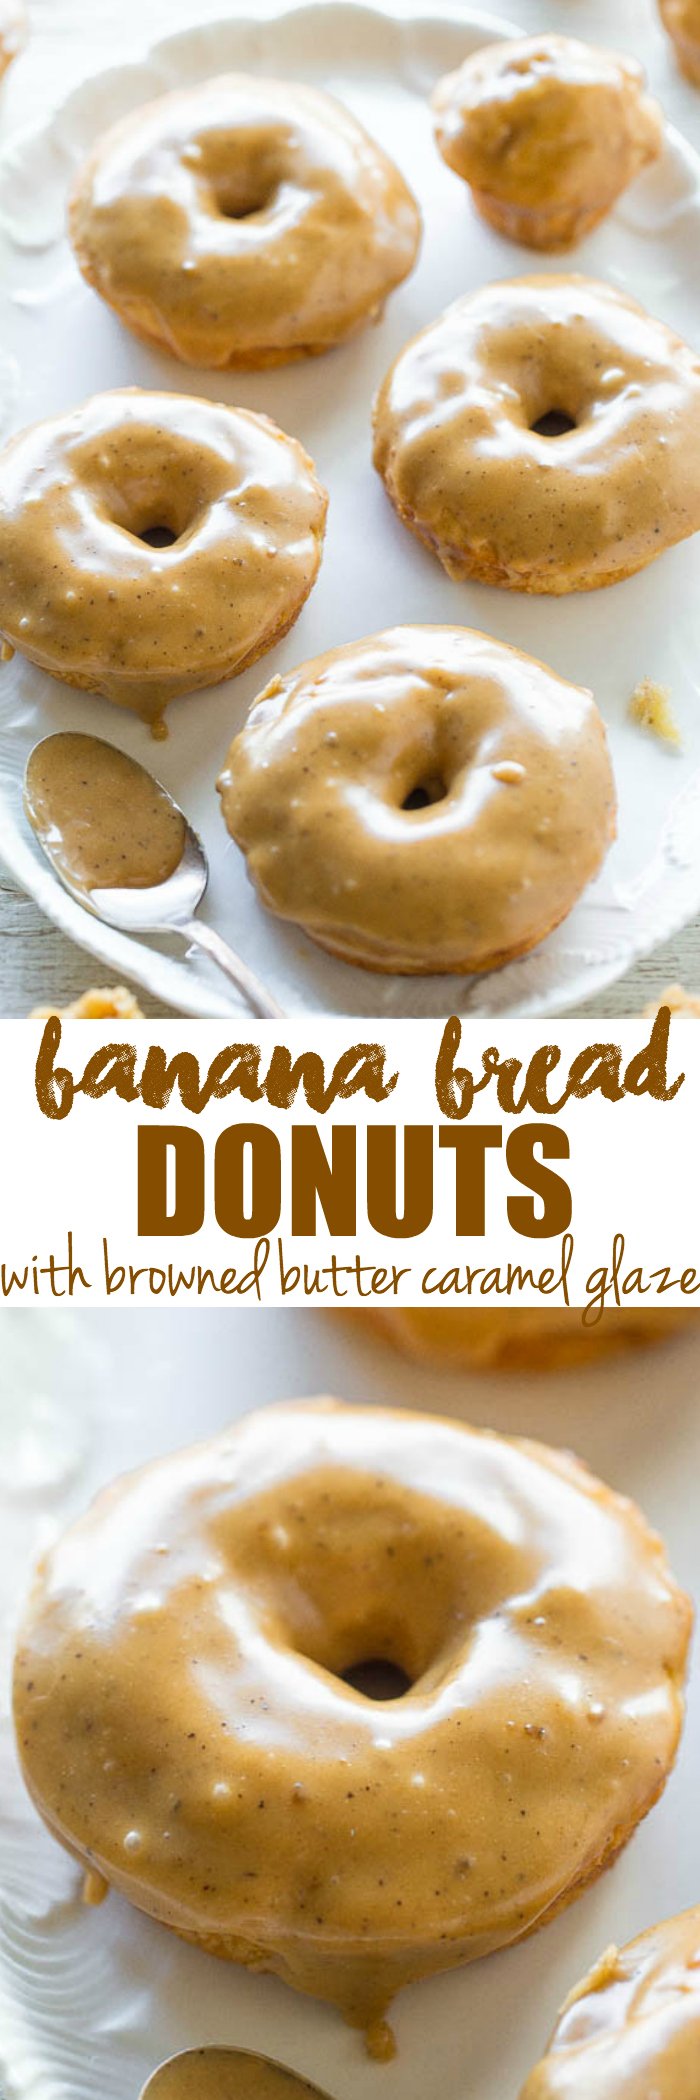 Banana Bread Donuts with Browned Butter Caramel Glaze - Banana bread in the form of soft, fluffy baked donuts and donut holes!! No-mixer recipe that's as easy as making muffins! The glaze makes them IRRESISTIBLE!!